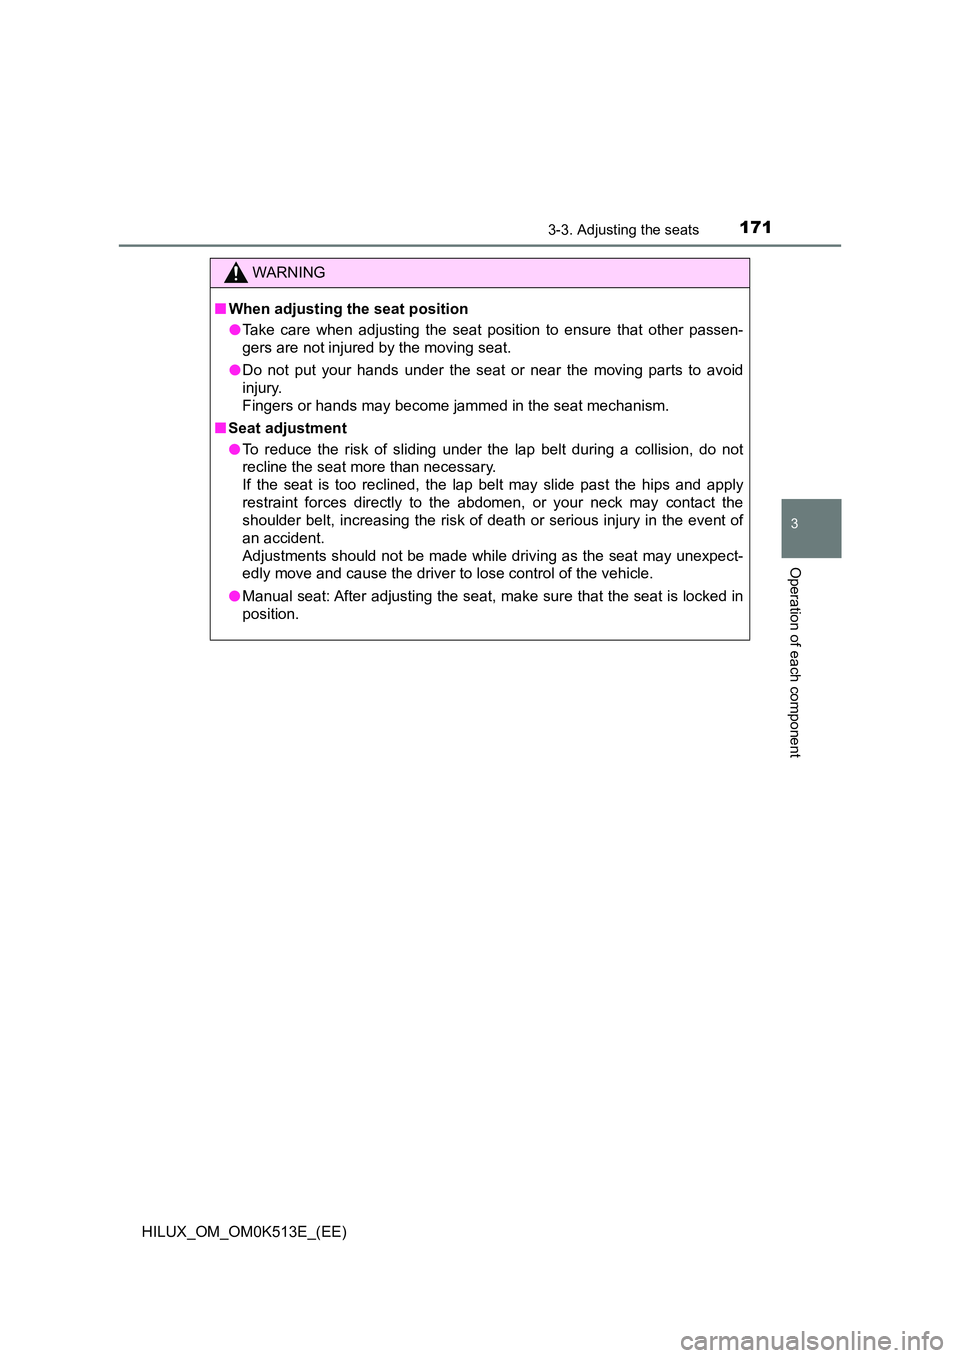 TOYOTA HILUX 2021  Owners Manual (in English) 1713-3. Adjusting the seats
3
Operation of each component
HILUX_OM_OM0K513E_(EE)
WARNING
�QWhen adjusting the seat position 
�O Take care when adjusting the seat position to ensure that other passen- 